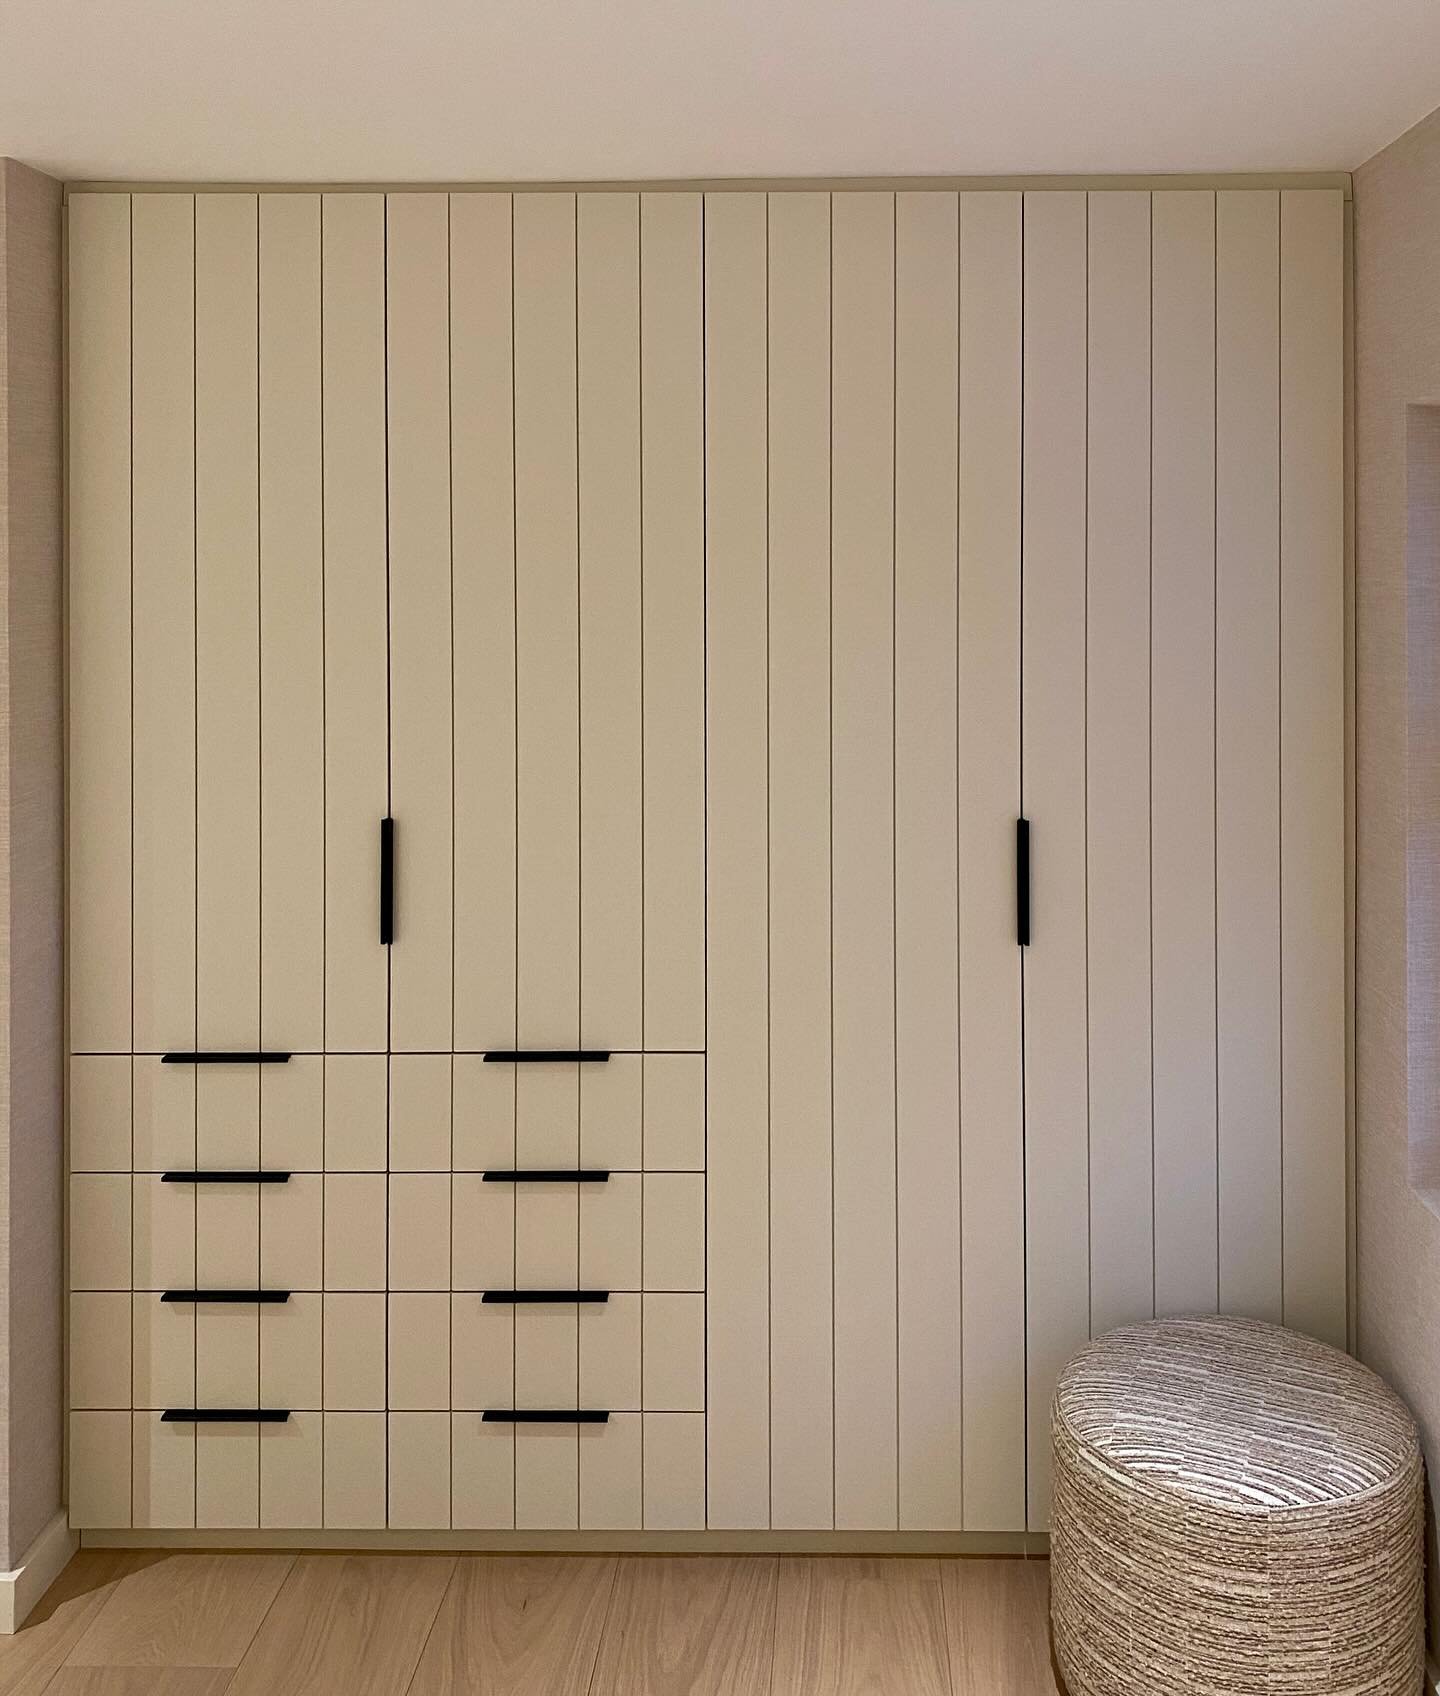 One of our most recent projects, a simple yet stylish wardrobe designed by @falchiinteriors 👌
.
.
.
#bespokejoinery #fittedwardrobes #interiors #bespokewardrobes #furnituremaker #wardrobedesign #wardrobes #buckinghamshirefurnituremaker